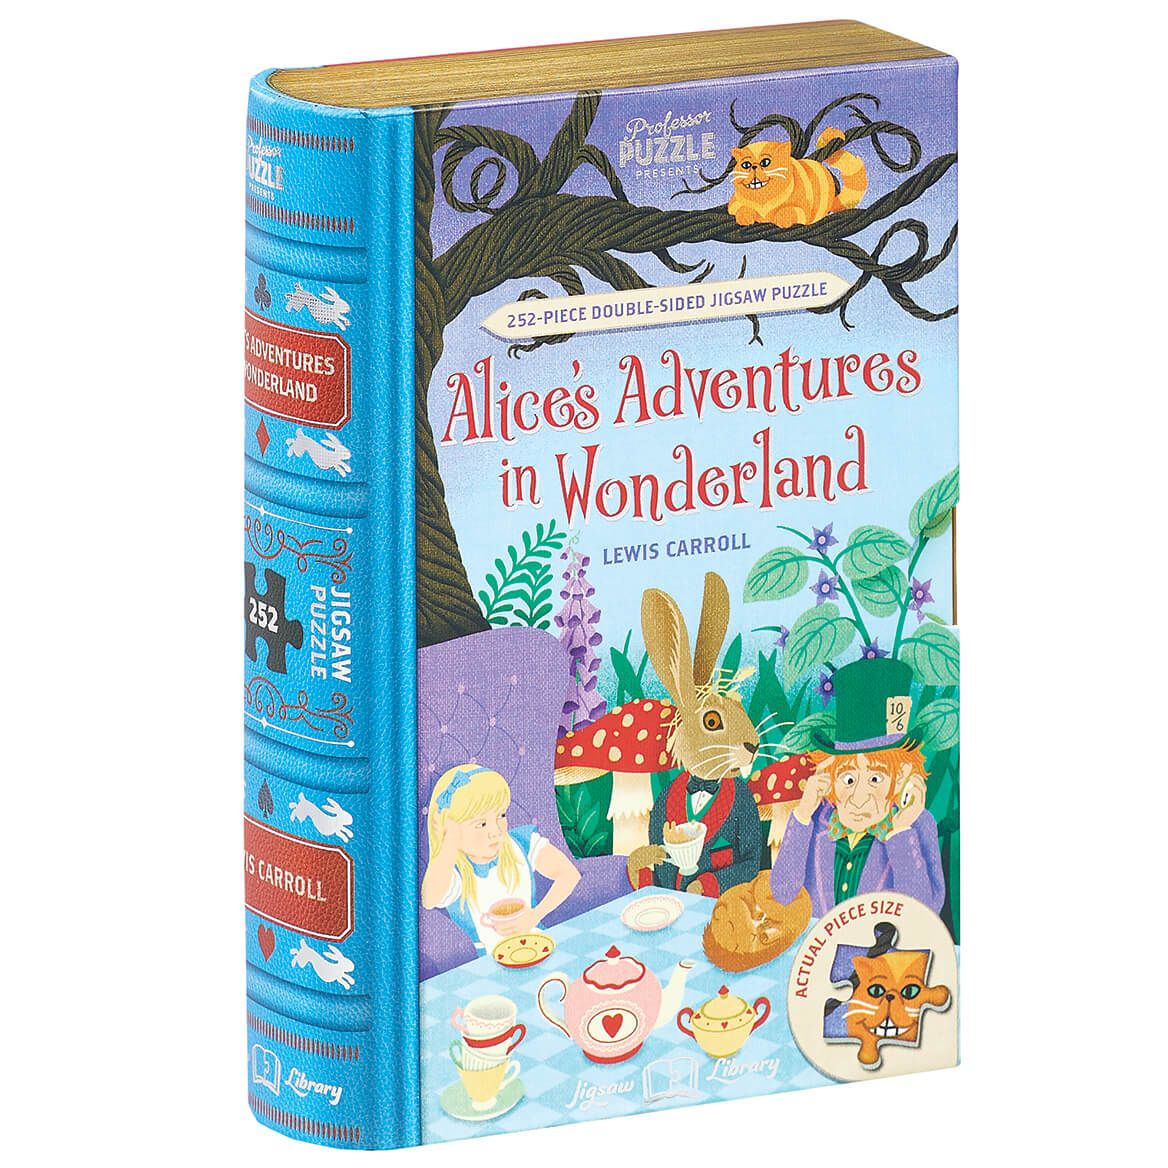 Jigsaw Library "Alice in Wonderland" 2-Sided Puzzle + '-' + 372662